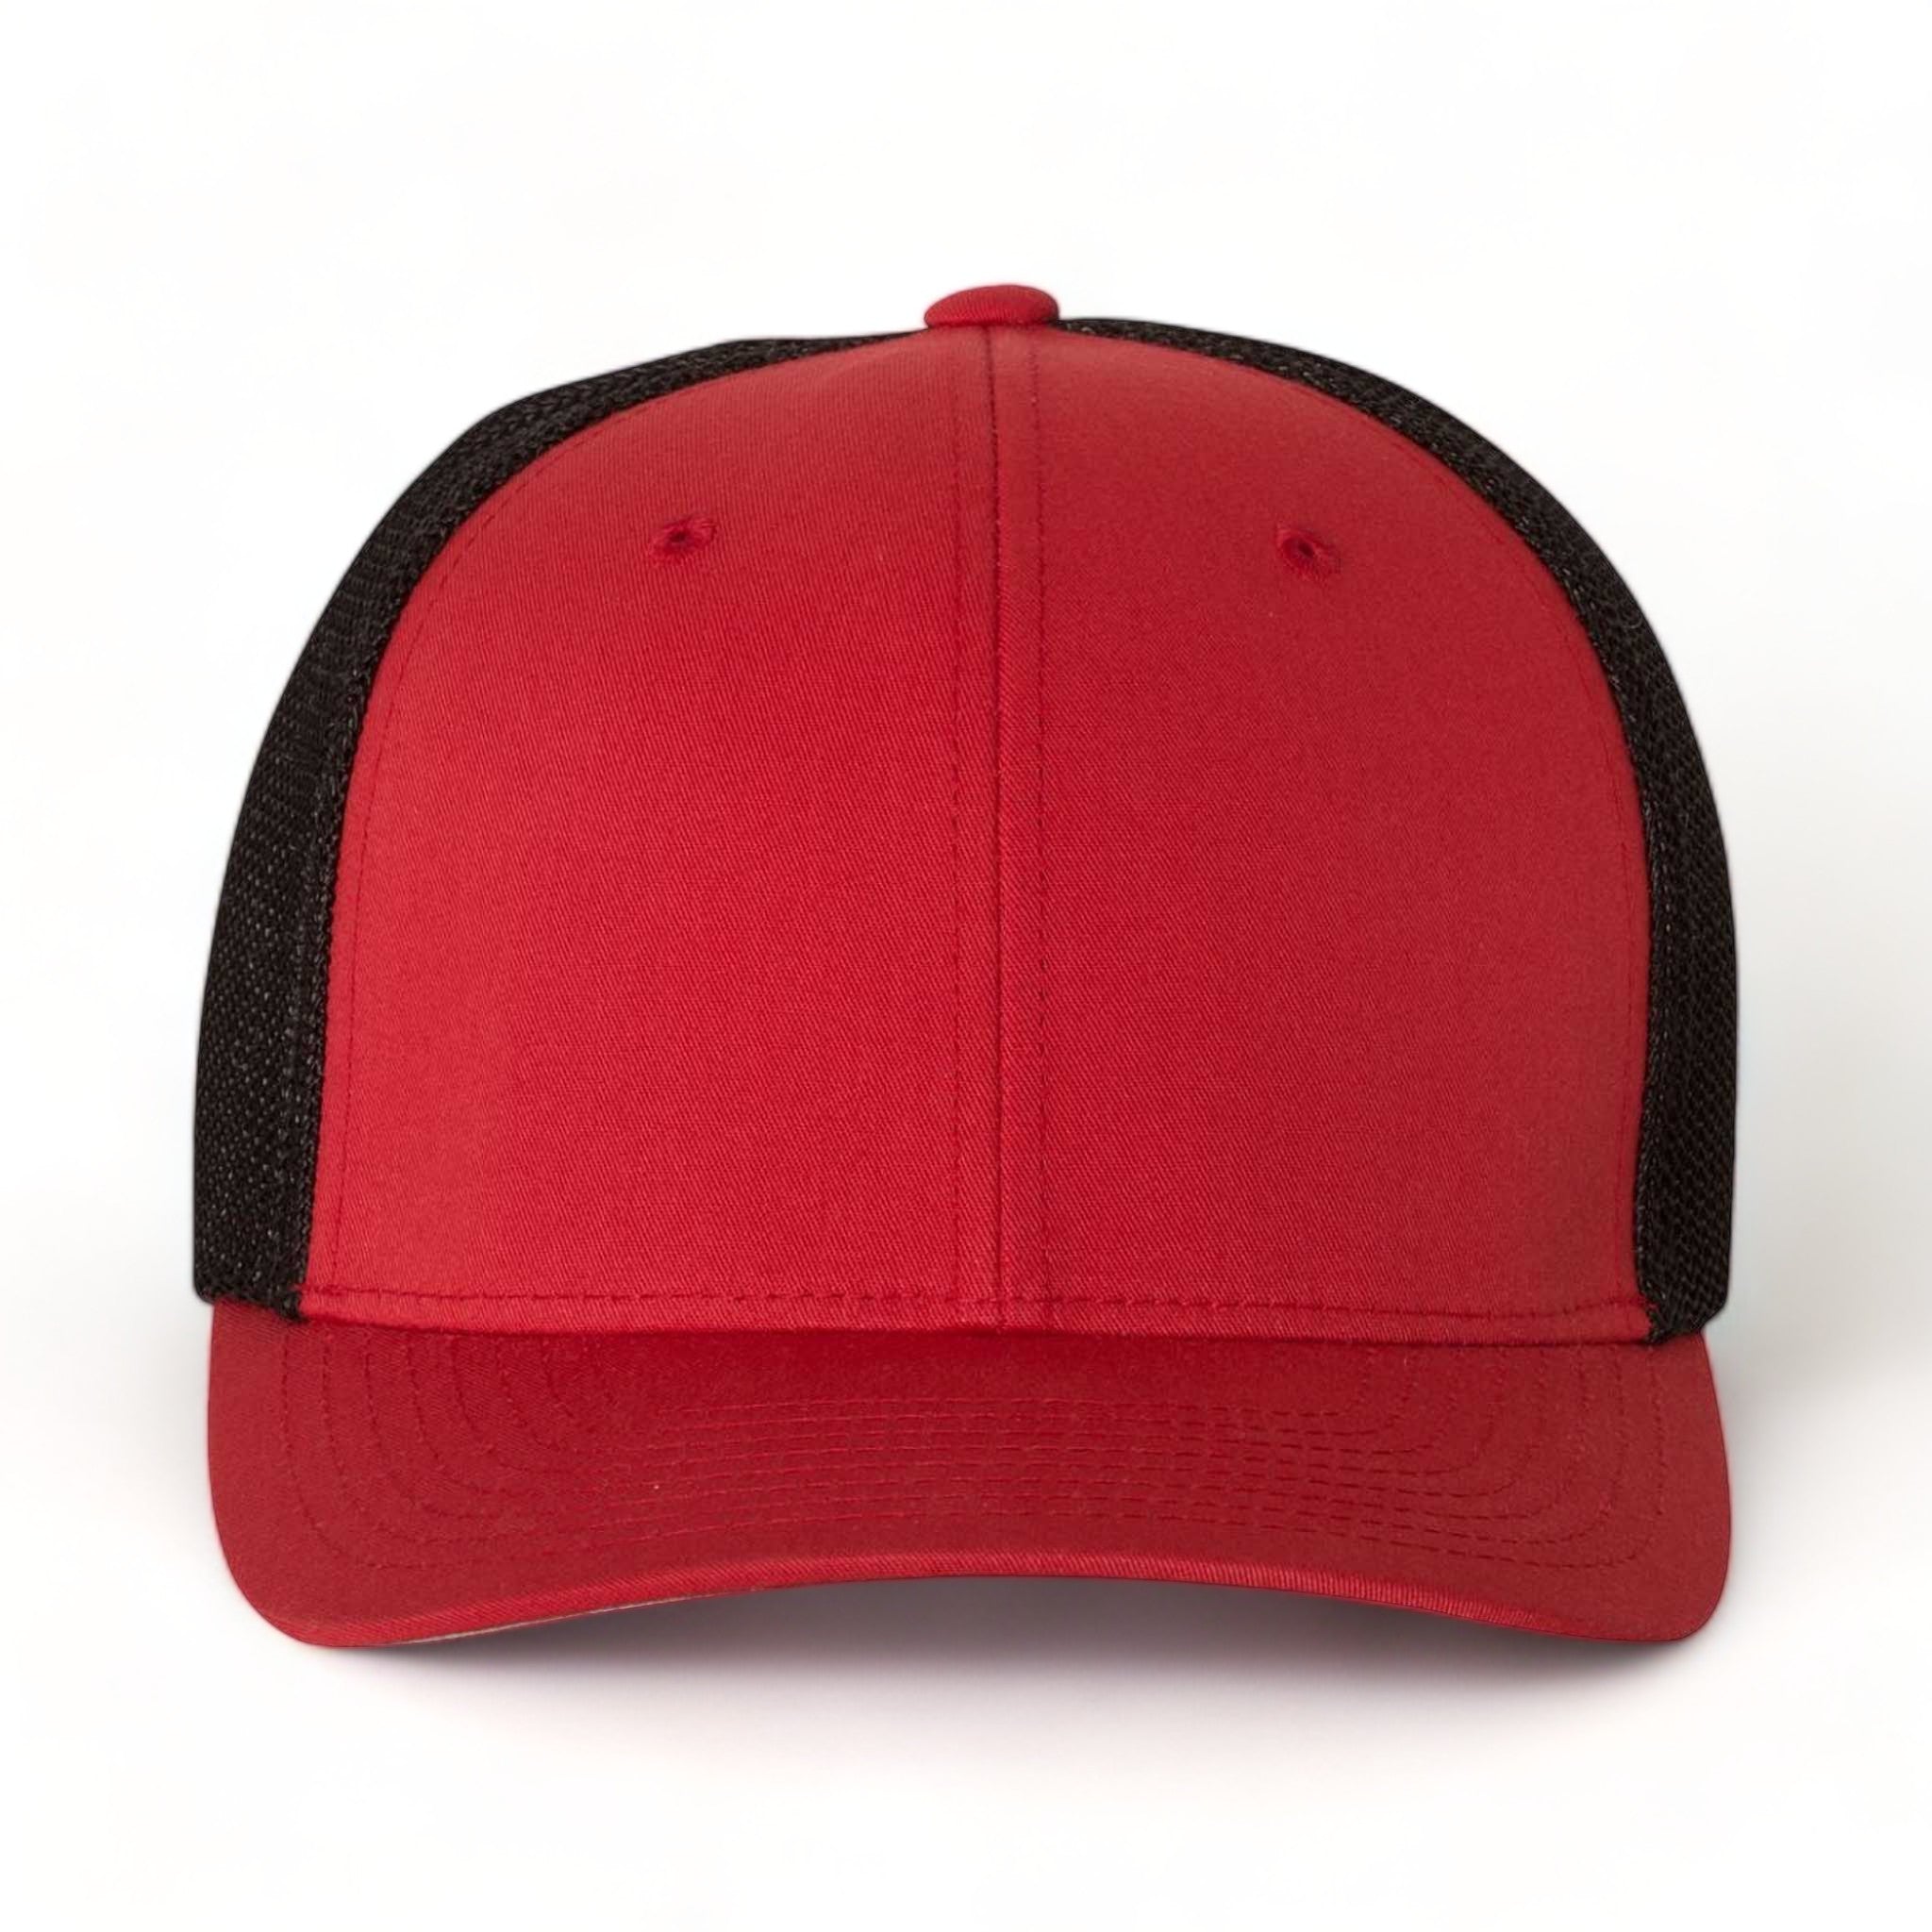 Front view of Flexfit 6511 custom hat in red and black